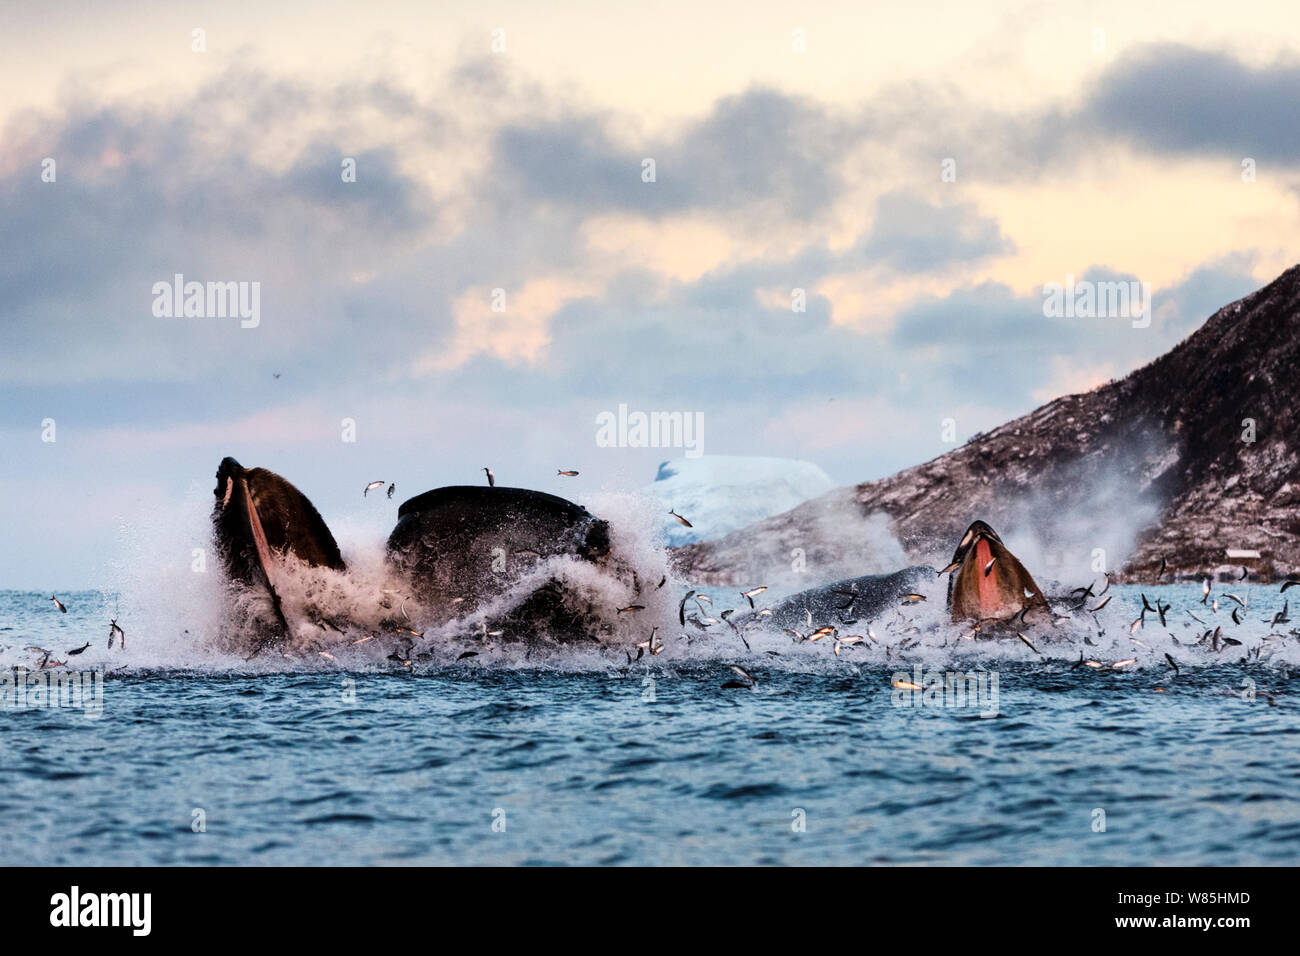 Hundreds of Herring  (Clupea harengus) jumping out of the water when bubble-net feeding Humpback whales (Megaptera novaeangliae) attack from below. Image showing the gap between the upper and lower mandible. Kvaloya, Troms, Northern Norway. November. Stock Photo